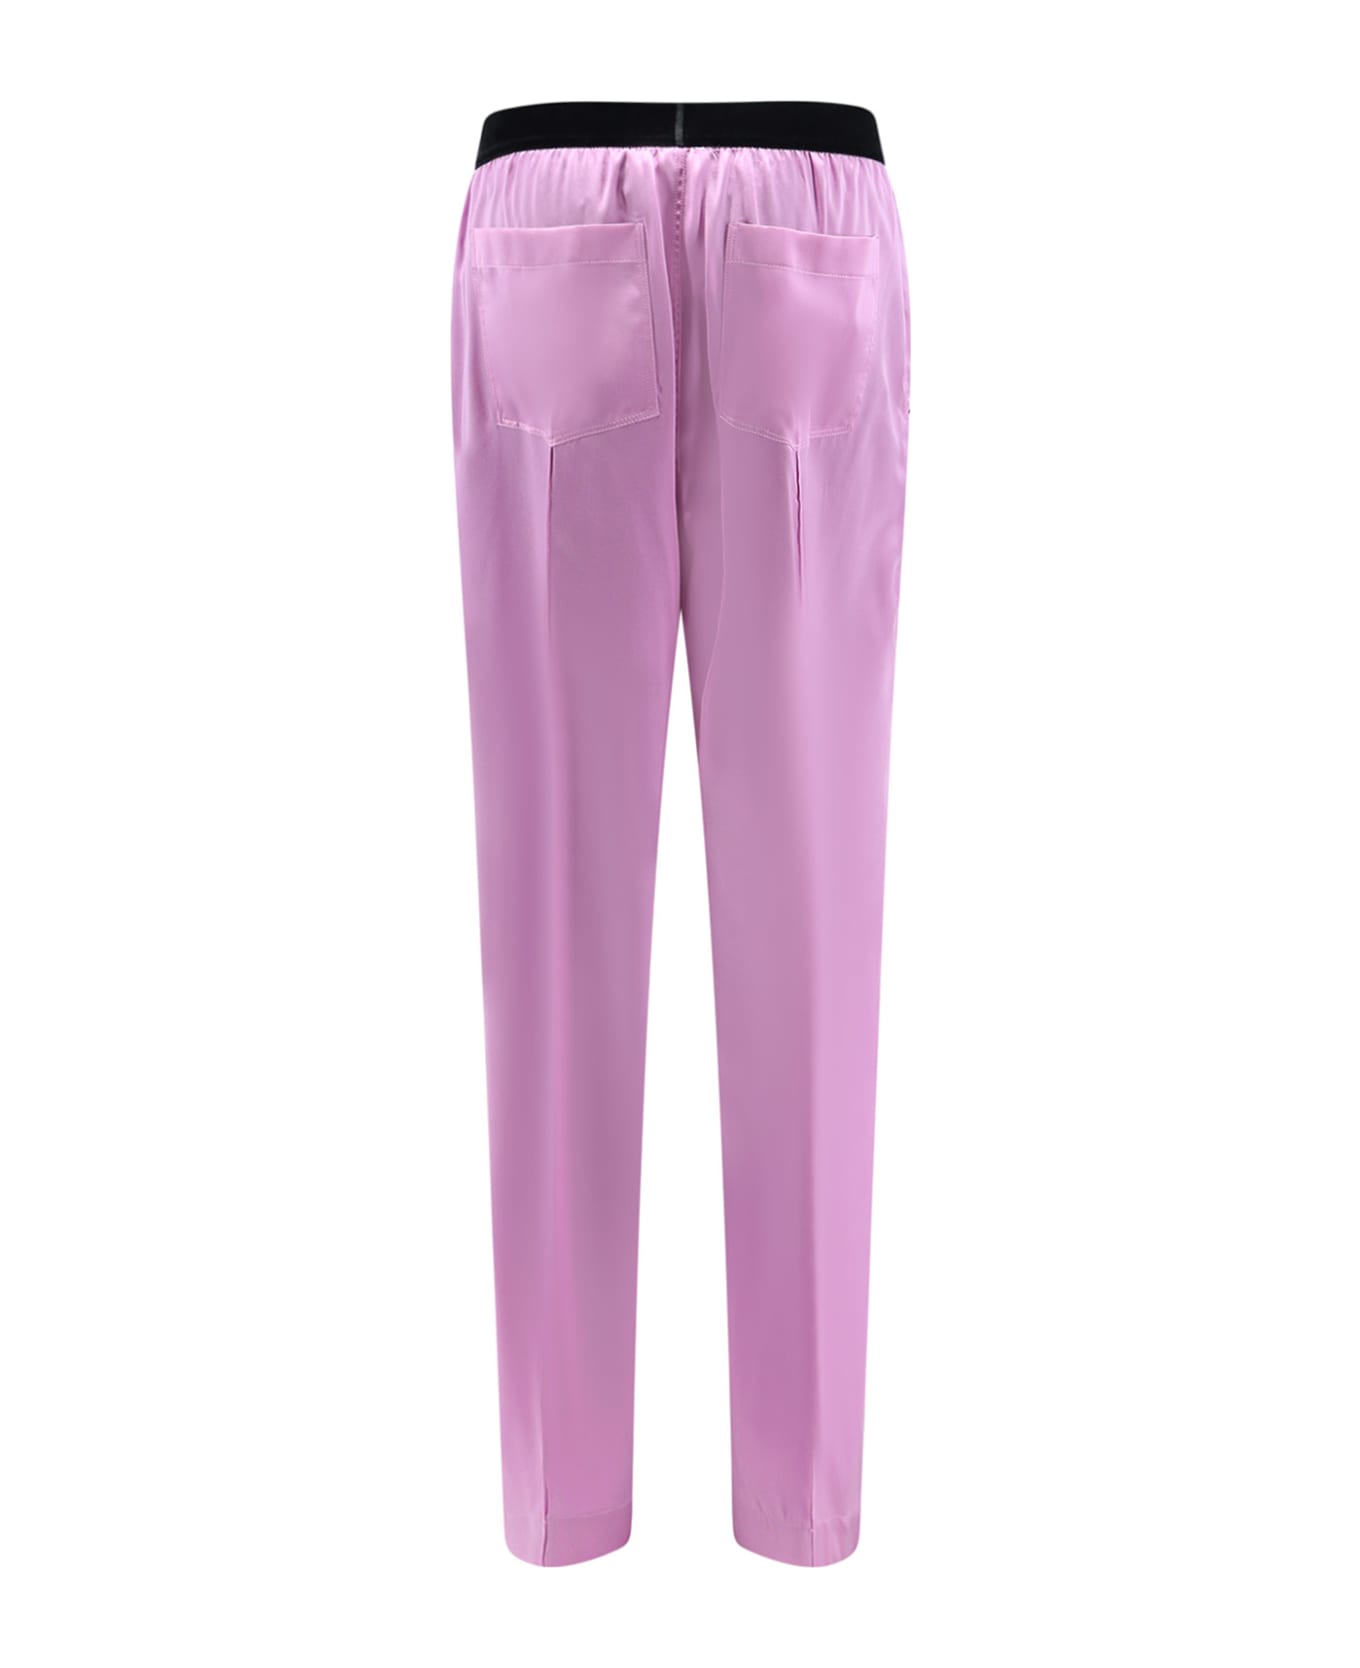 Tom Ford Trouser - Pink ボトムス